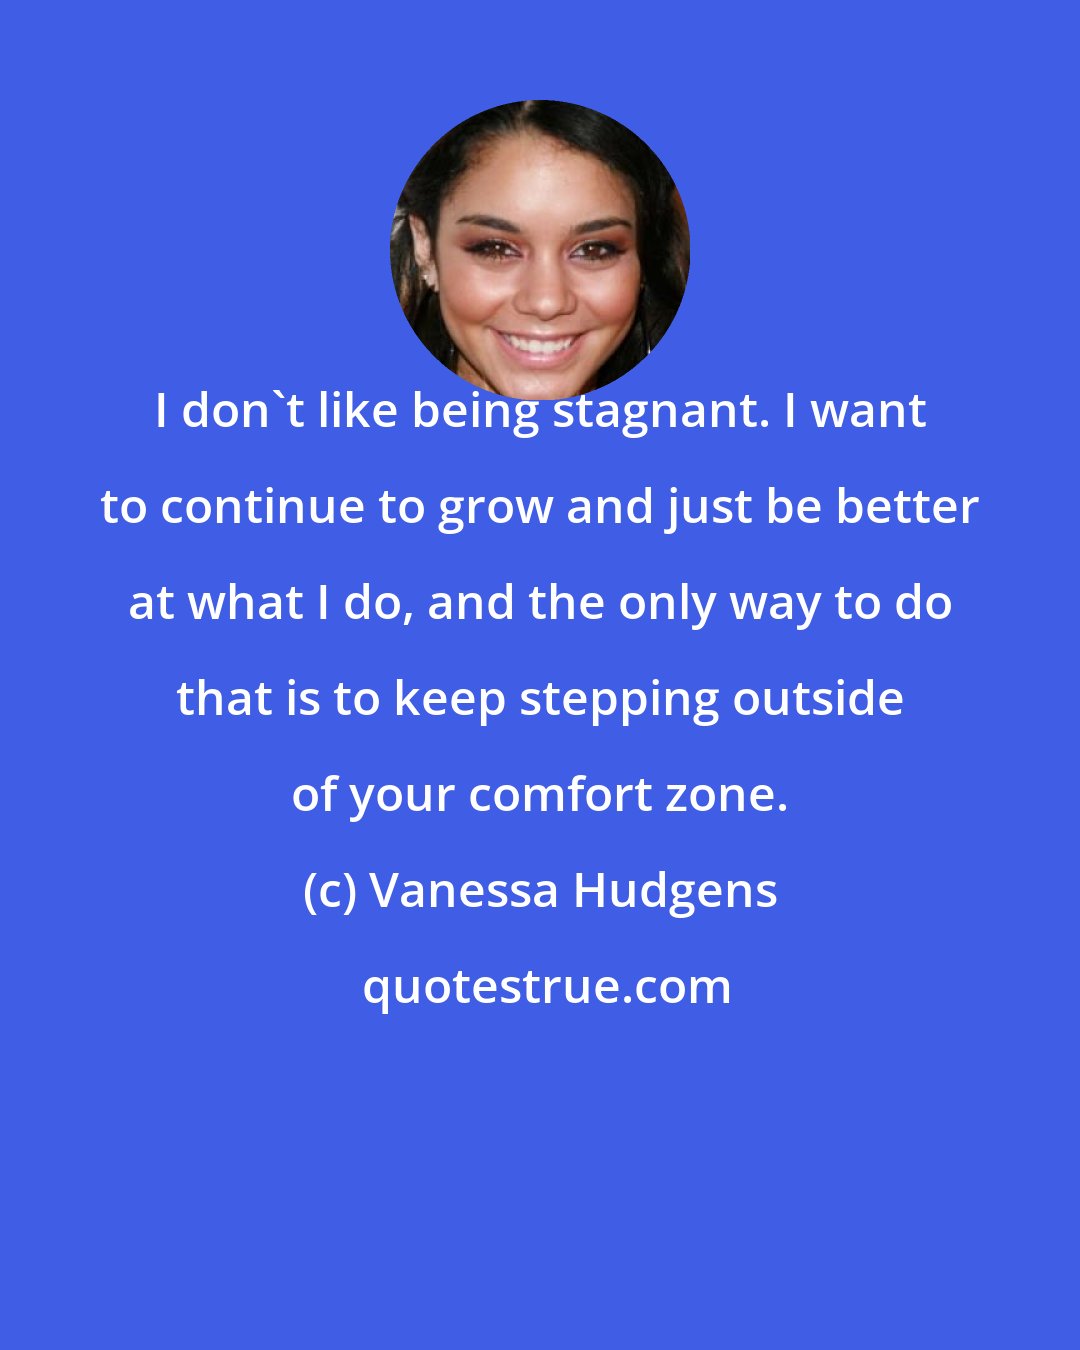 Vanessa Hudgens: I don't like being stagnant. I want to continue to grow and just be better at what I do, and the only way to do that is to keep stepping outside of your comfort zone.